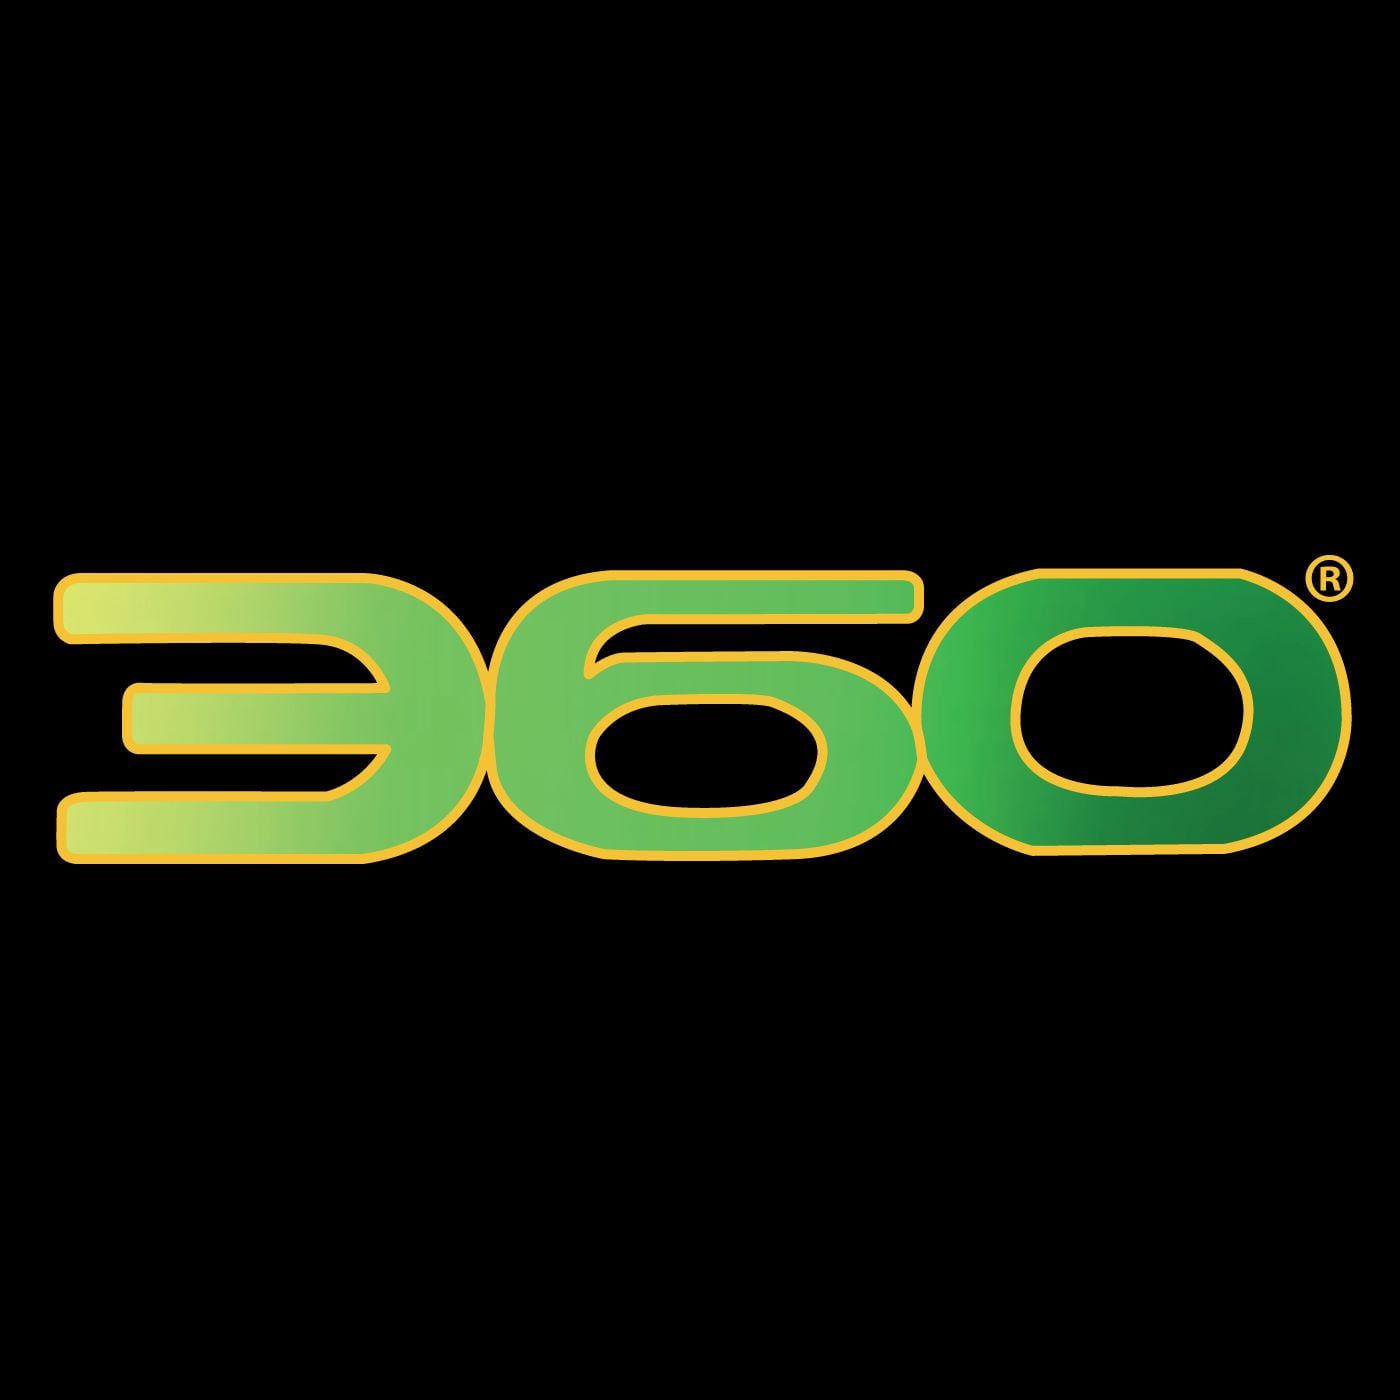 360 MAGAZINE official logo in green gradient with gold outline.